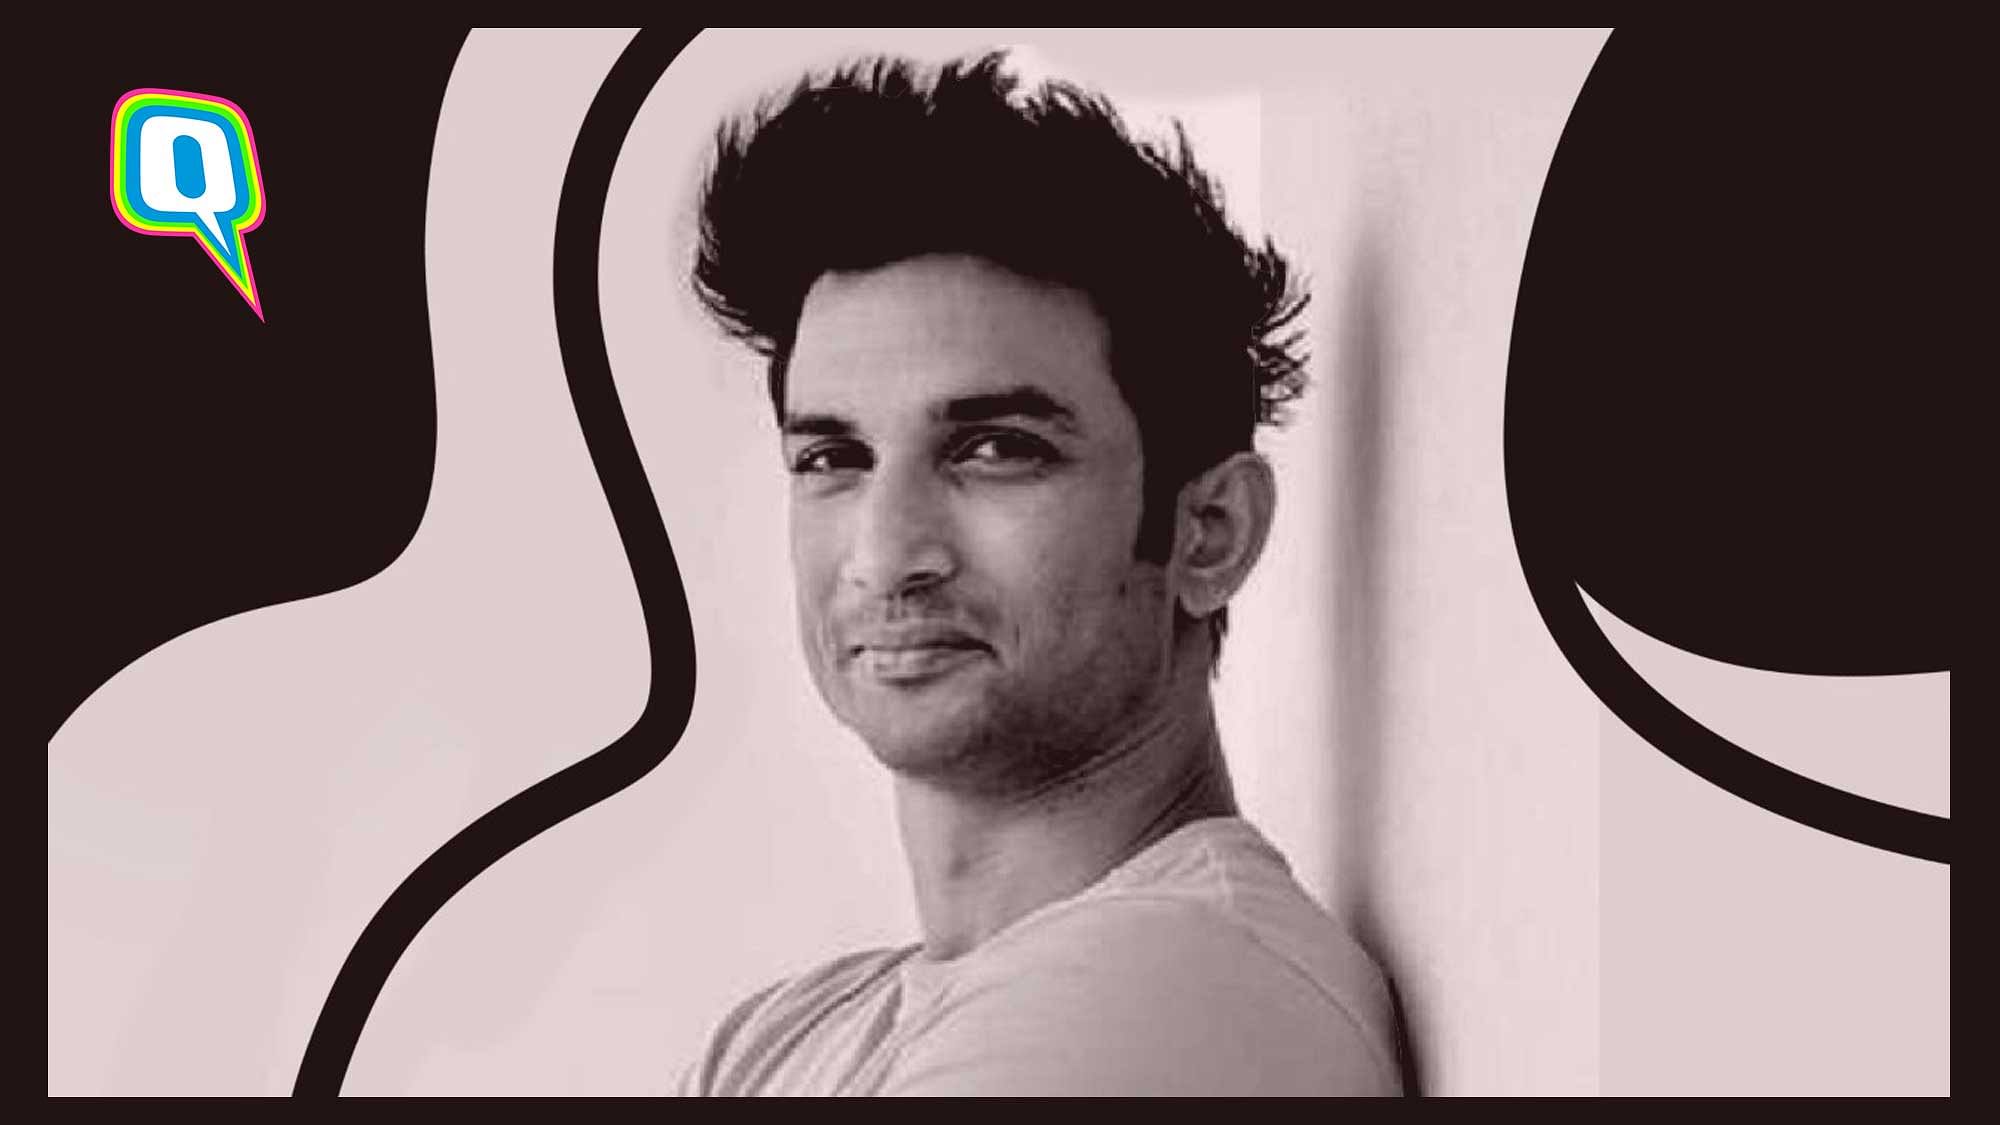 Watch Sushant Singh Rajput’s best quotes about life and work that he shared with his fans over the years. 